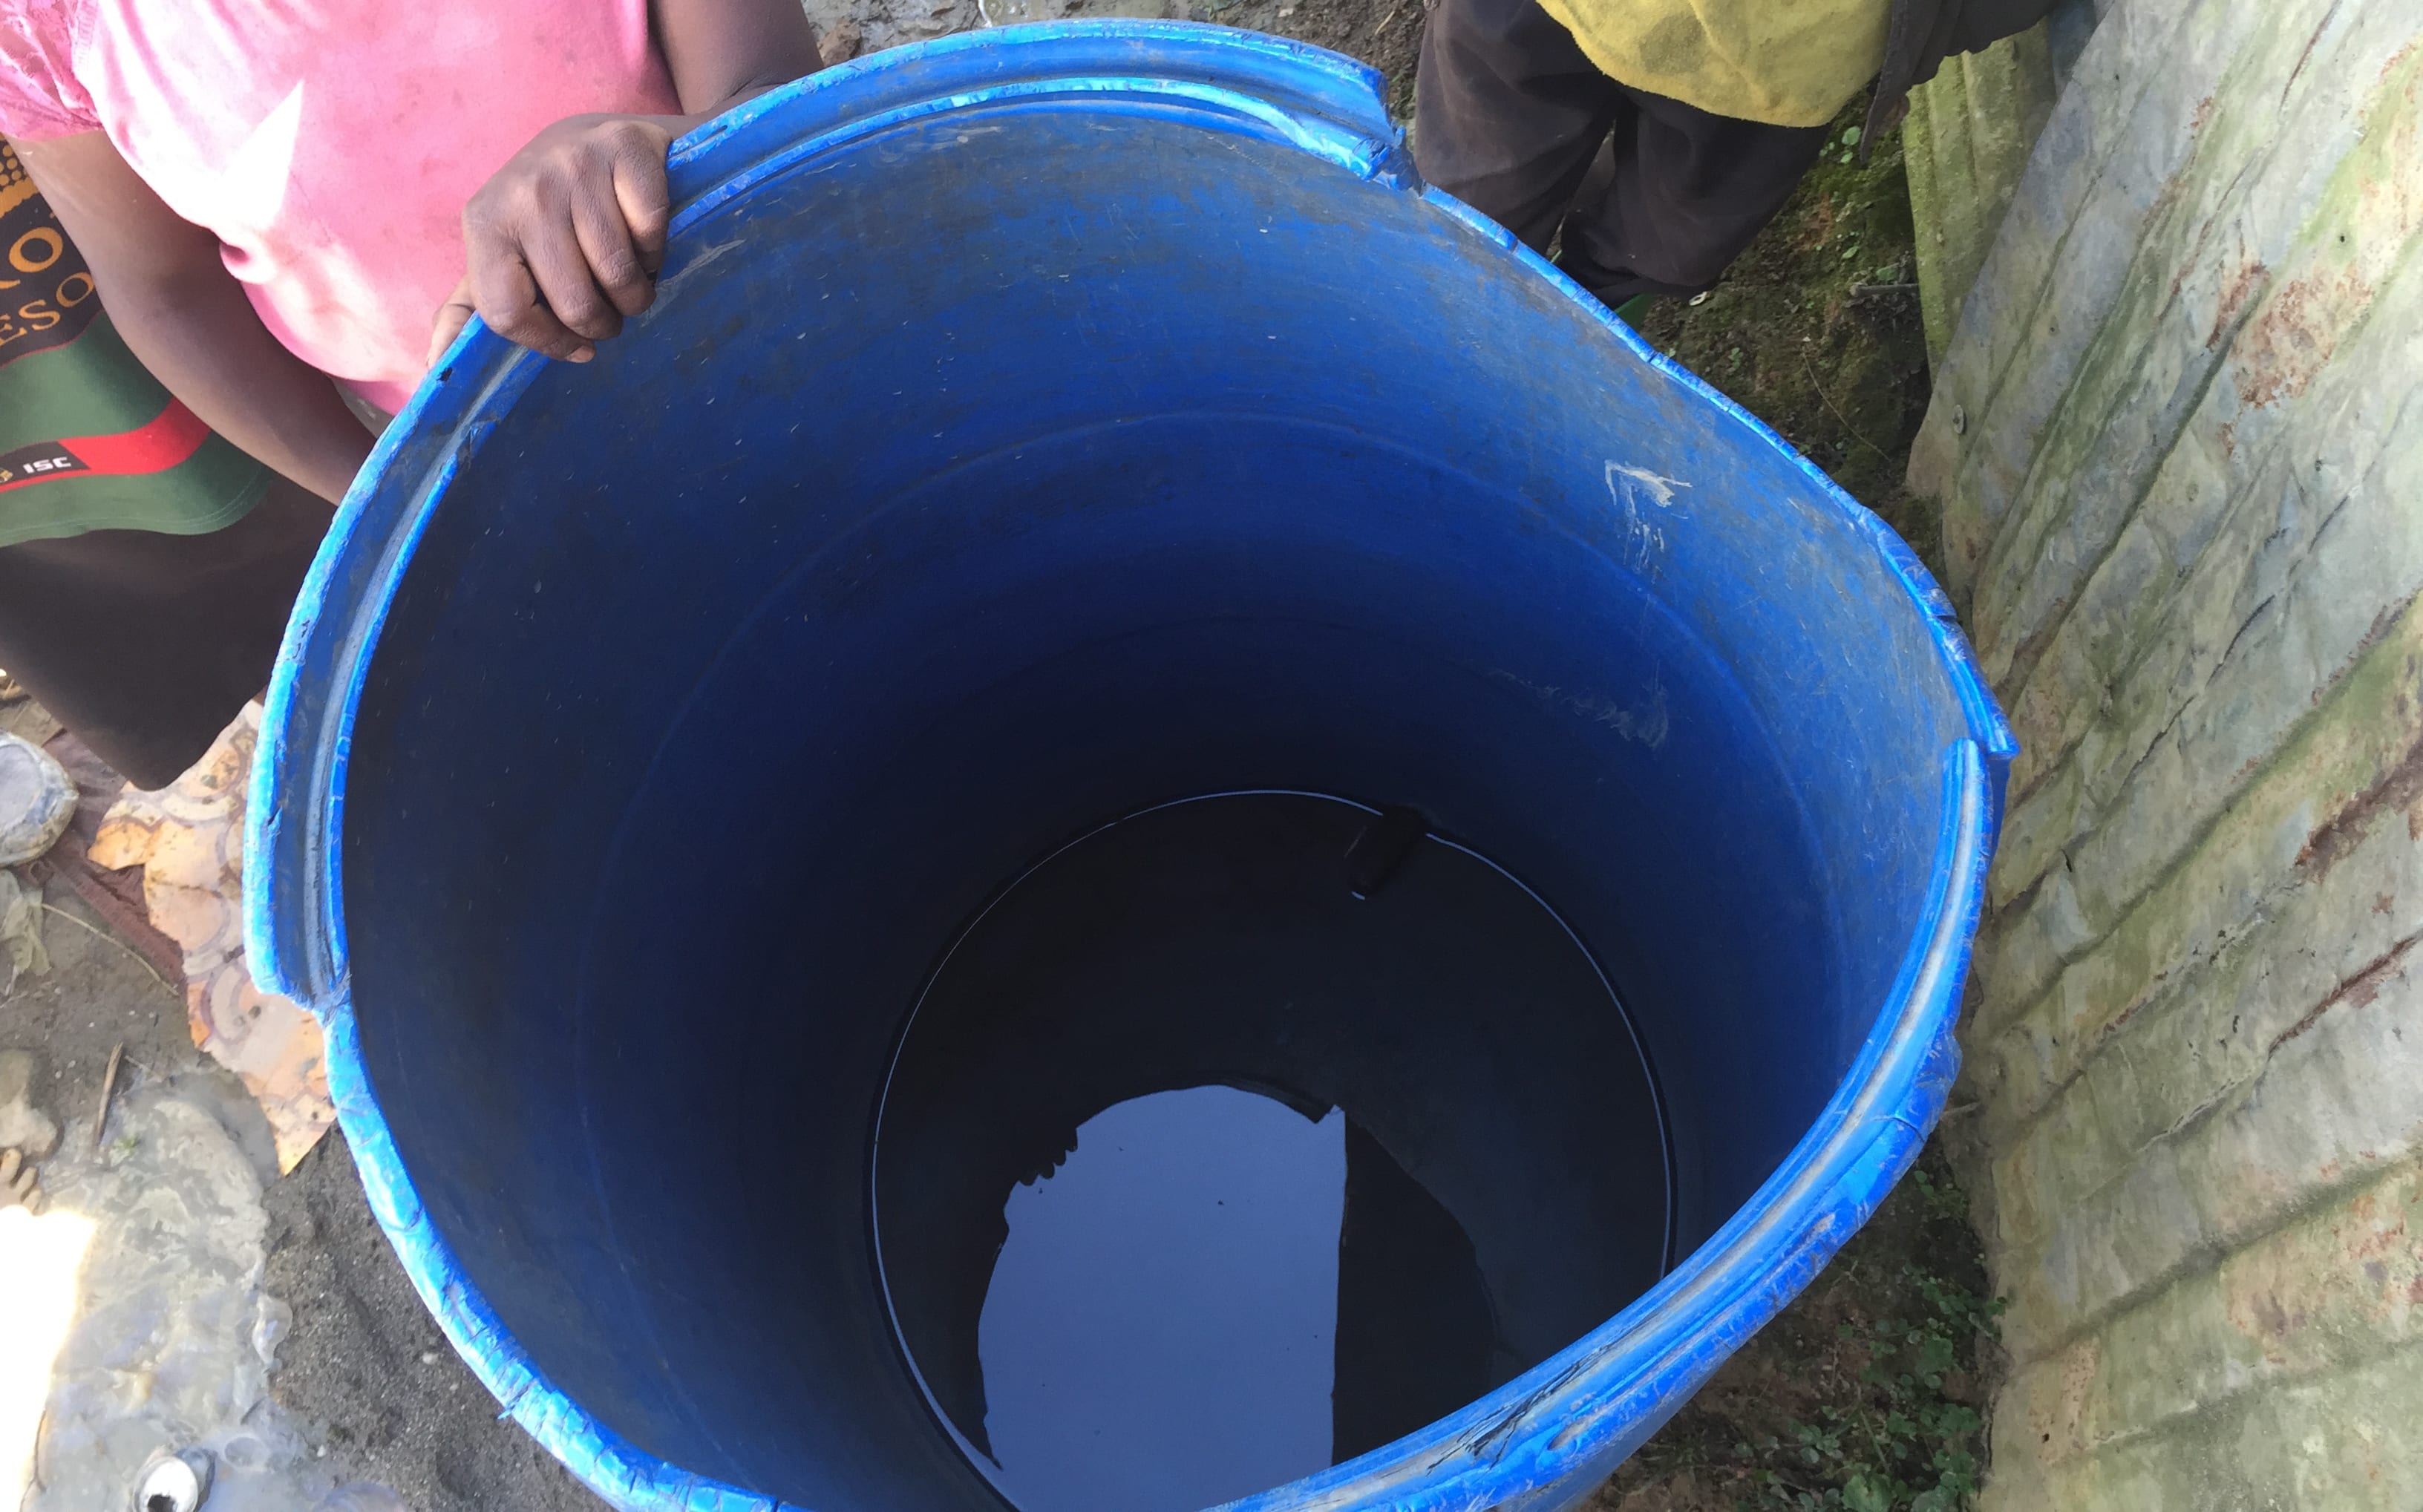 Communities living around Papua New Guinea's Porgera gold mine lack enough access to clean water to meet their basic needs.